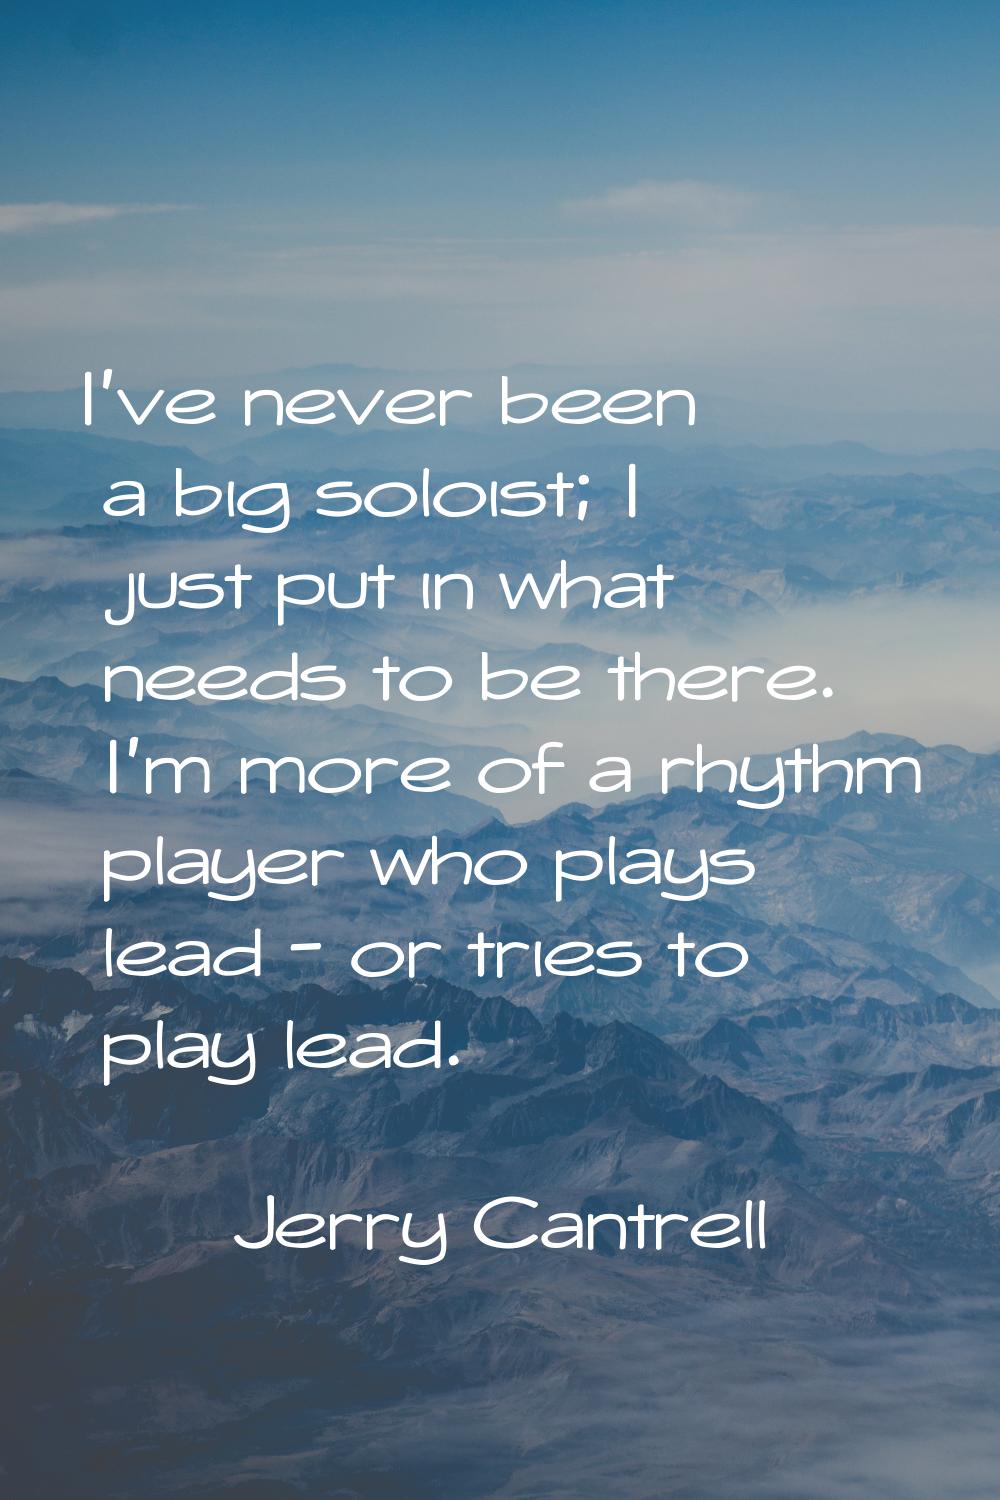 I've never been a big soloist; I just put in what needs to be there. I'm more of a rhythm player wh